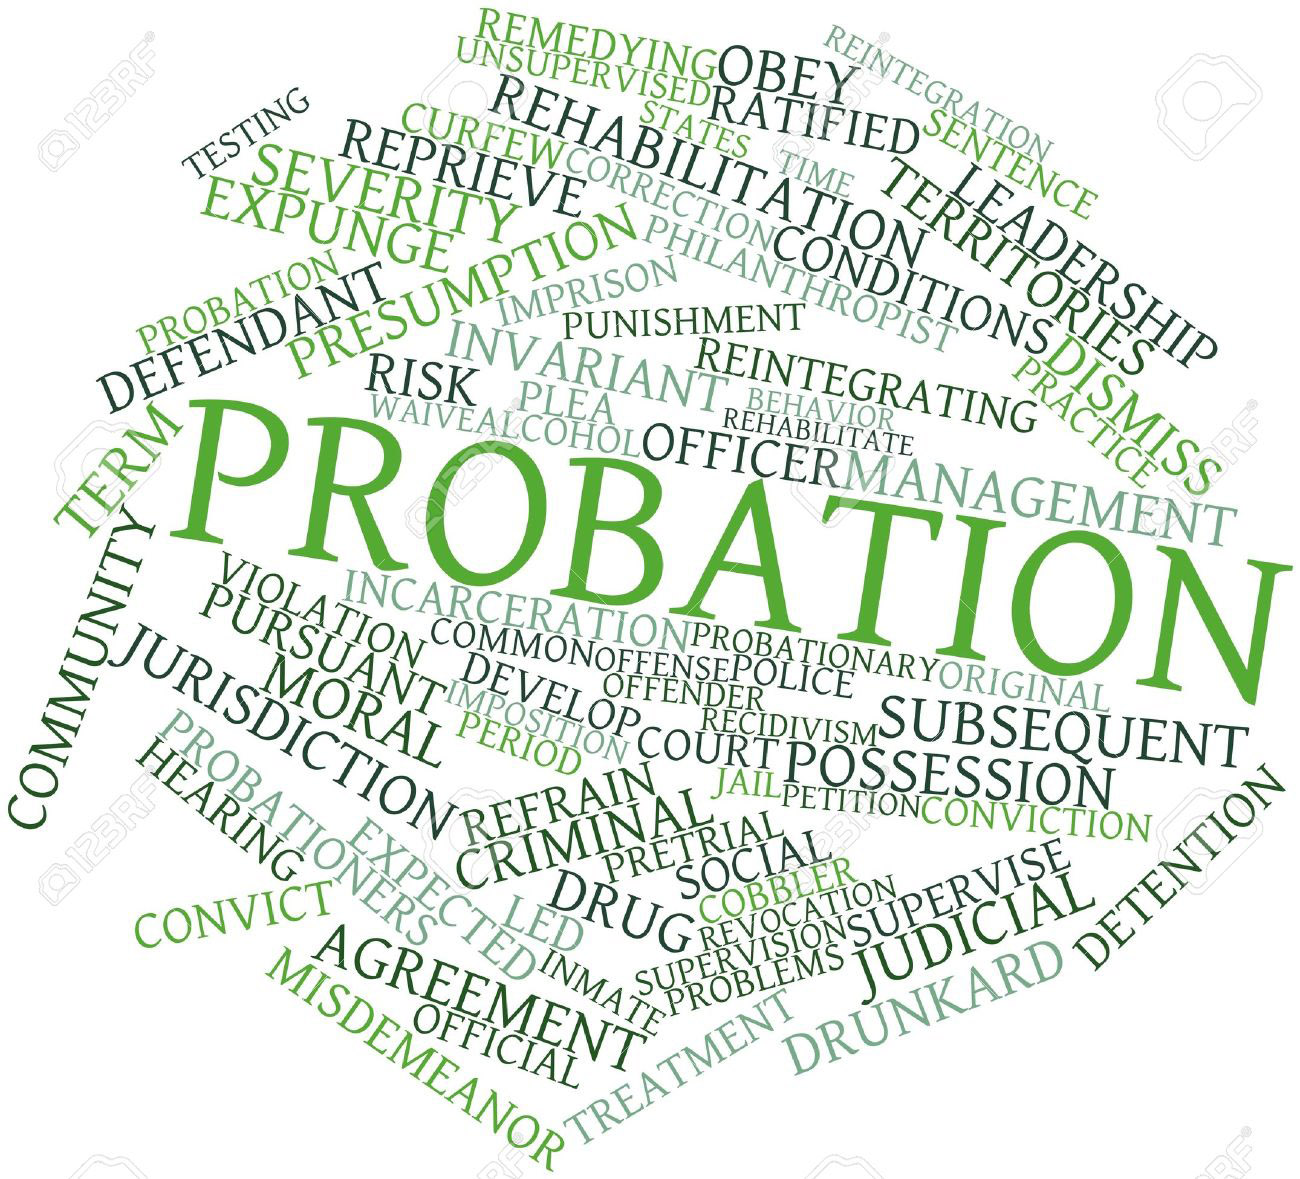 Bad News - A Colorado Deferred Judgment Is Not Technically A Probation Sentence